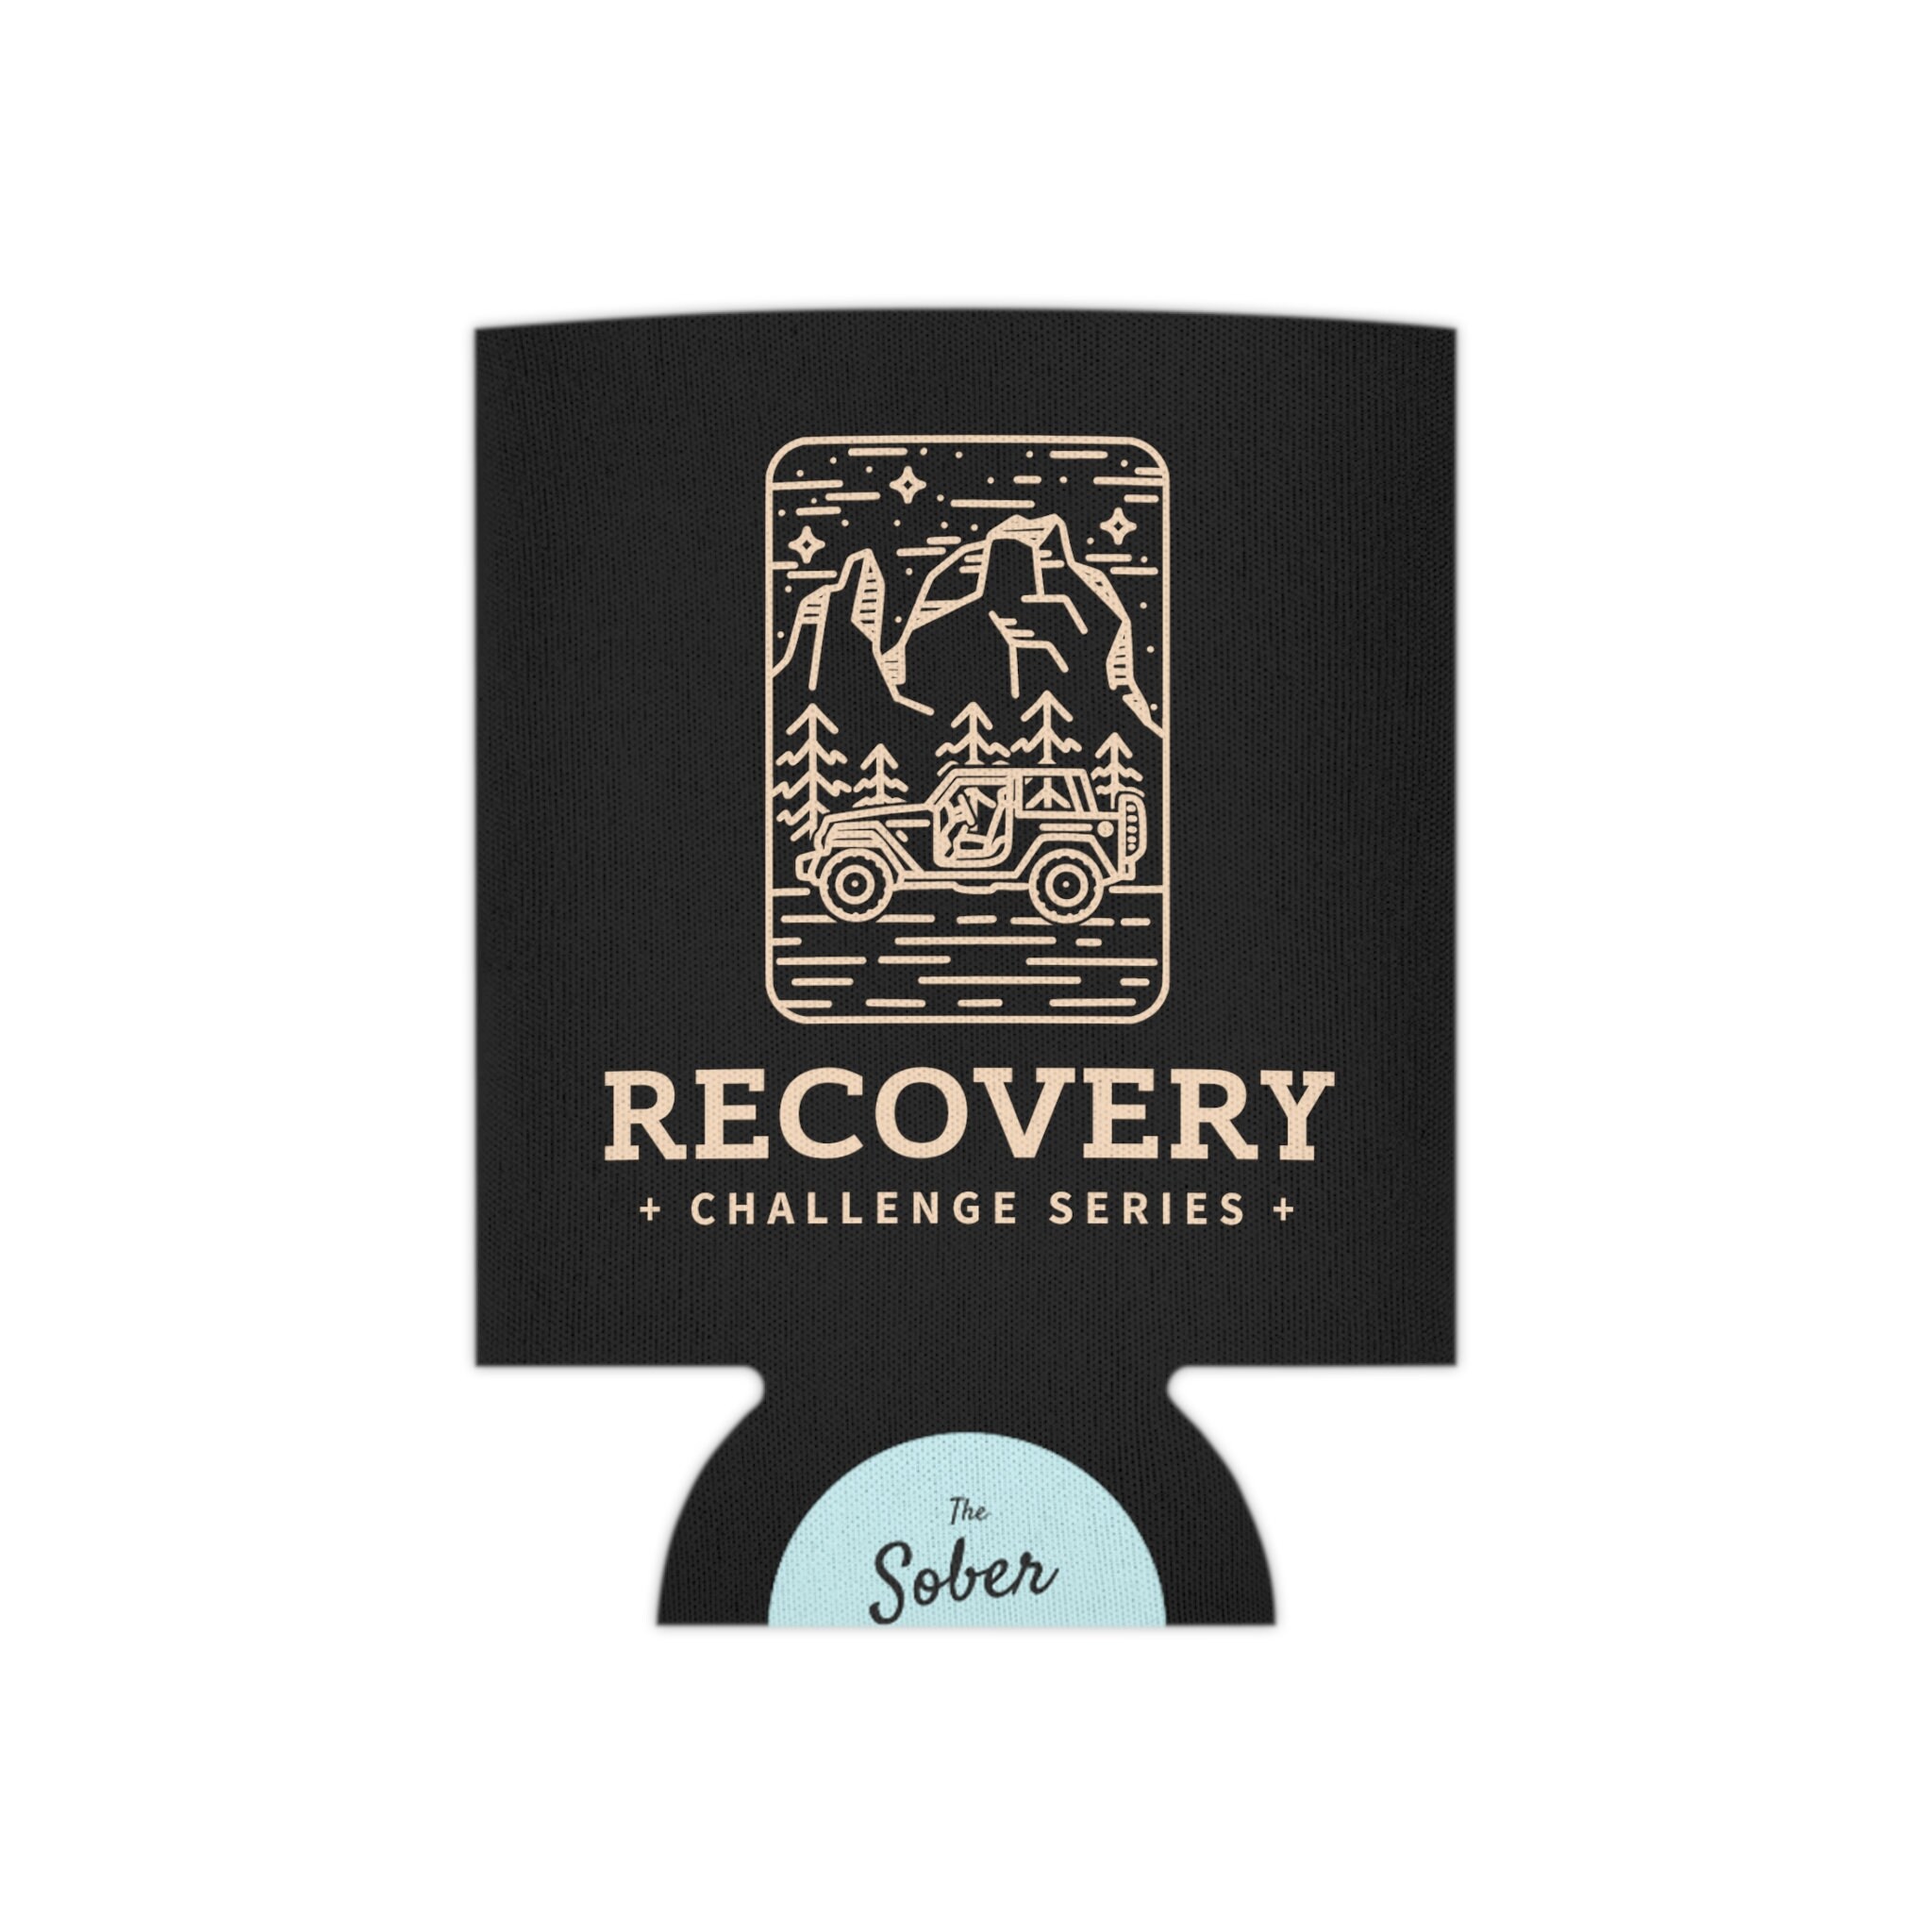 Rule 62 AA Chip Holder, AA Coin Holder, Sobriety Sayings, Recovery Gift,  Gift for an Alcoholic, Recovery Medallion, AA Chip Display, Sponsor 